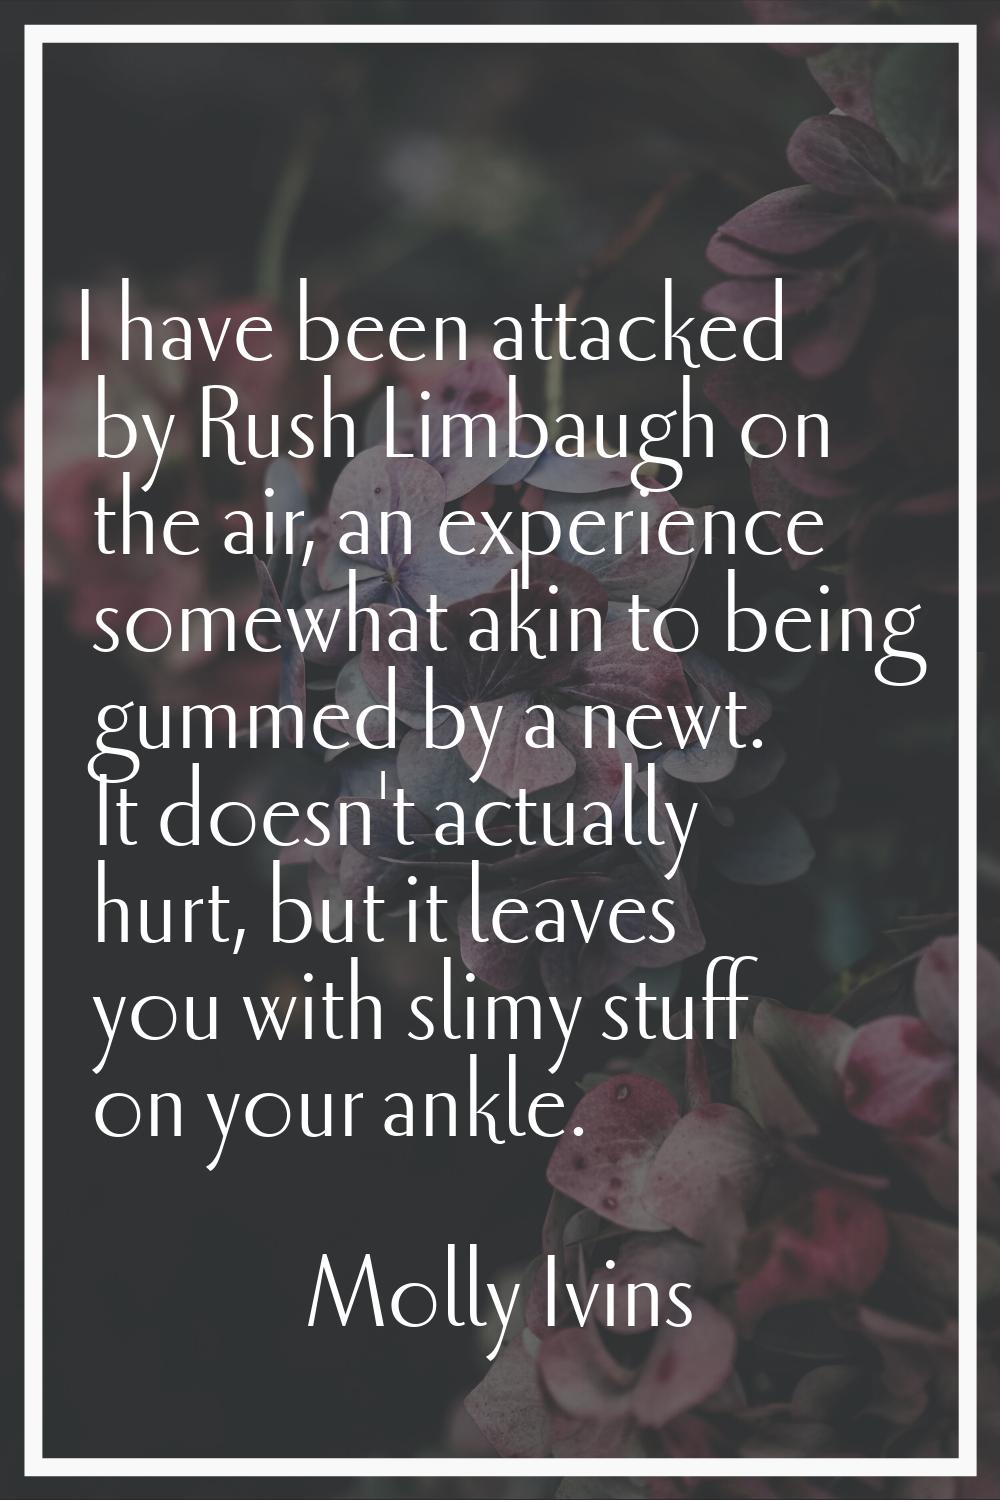 I have been attacked by Rush Limbaugh on the air, an experience somewhat akin to being gummed by a 